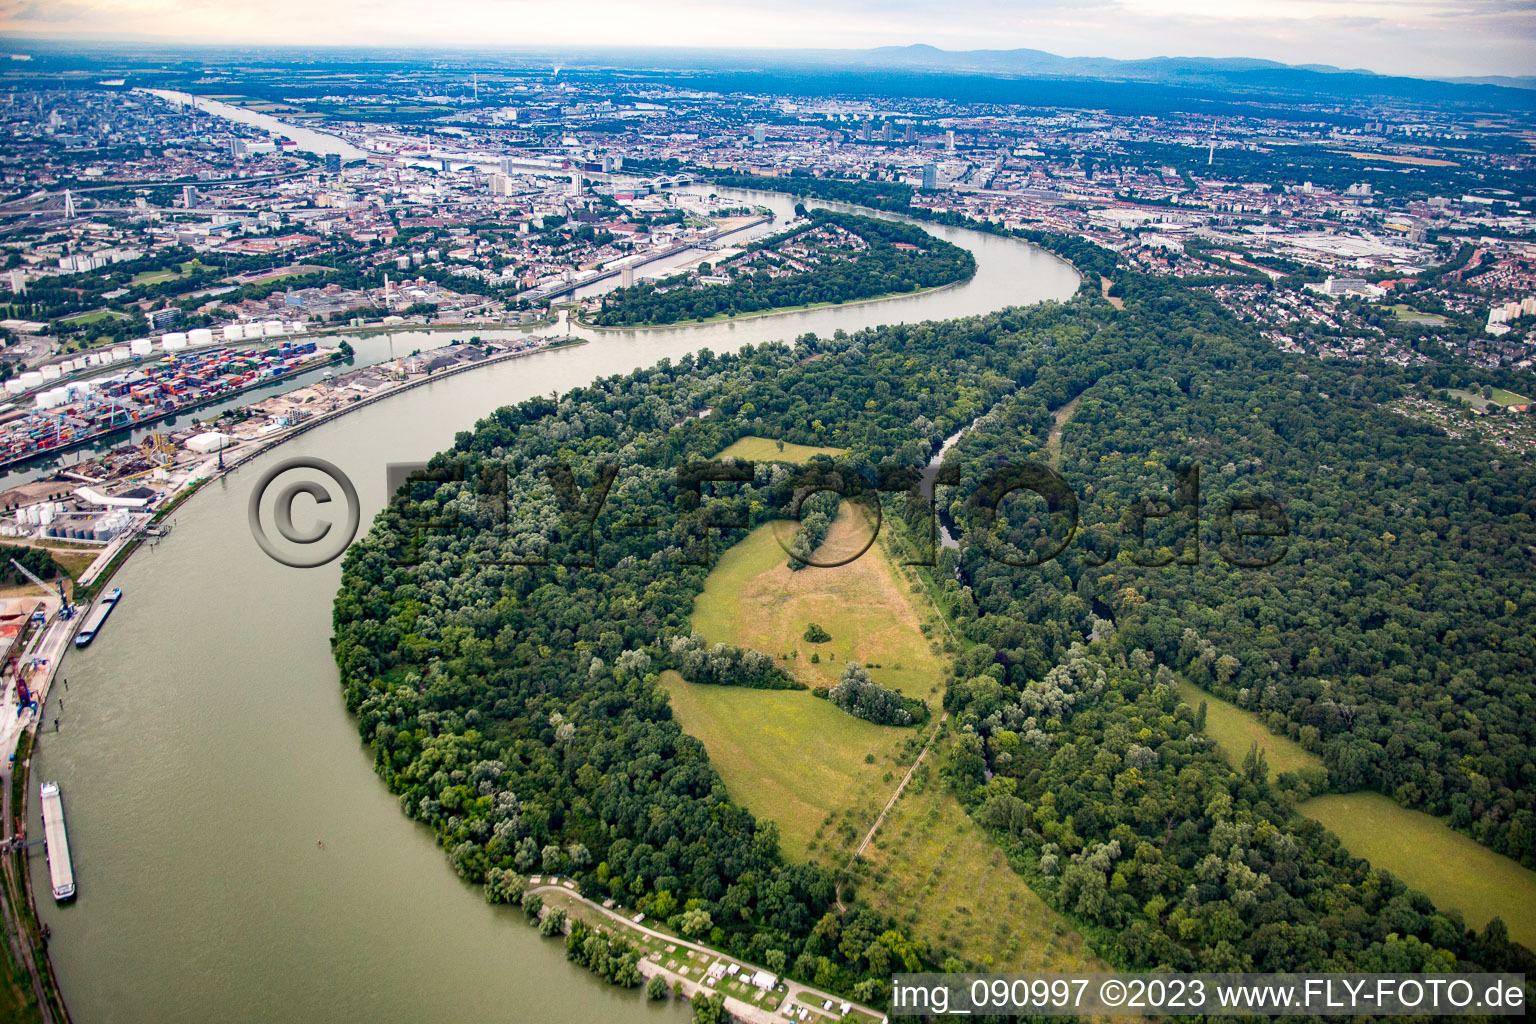 Rip Island in the district Niederfeld in Mannheim in the state Baden-Wuerttemberg, Germany